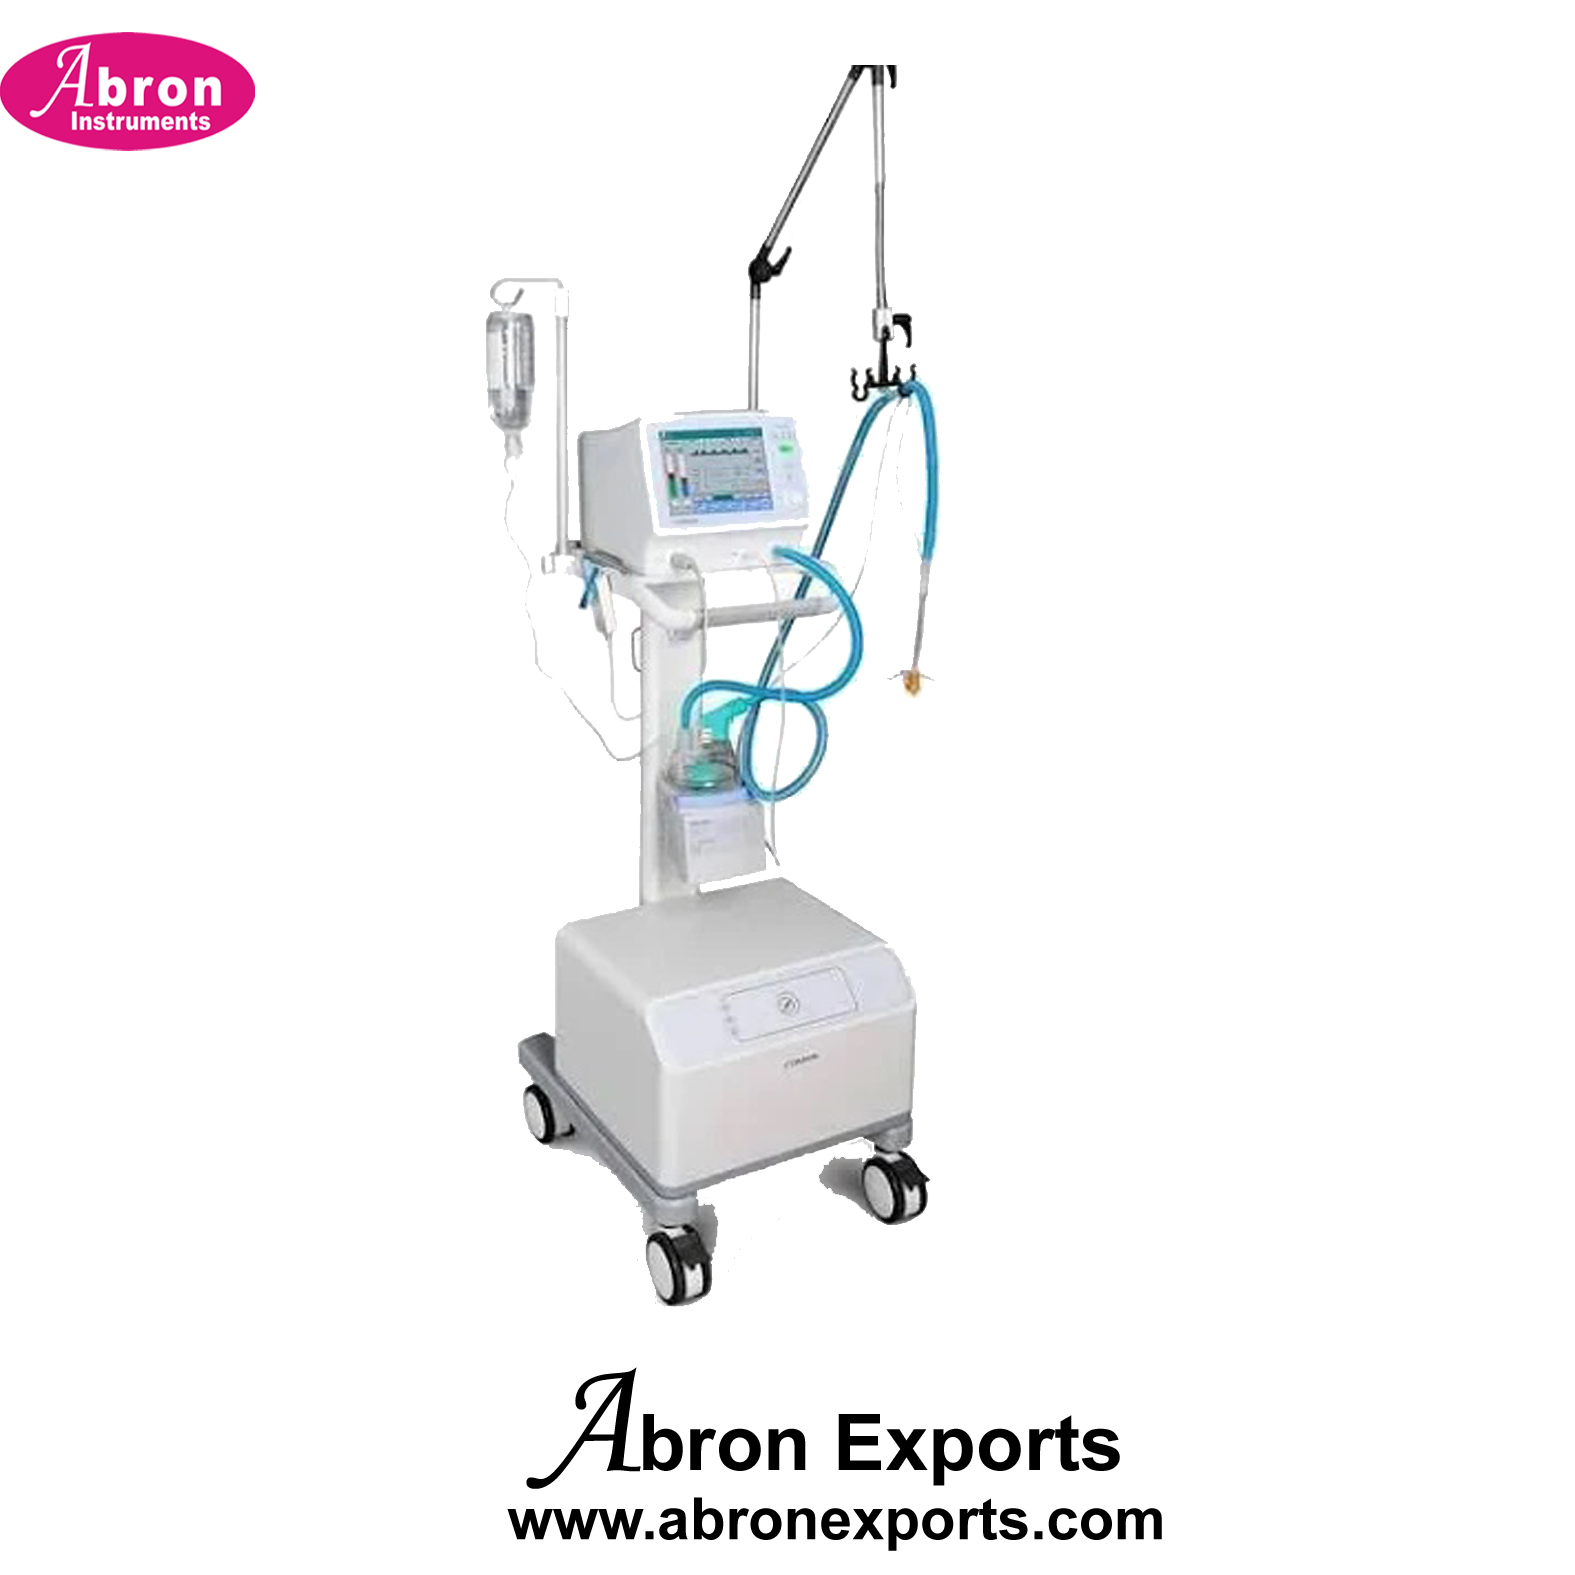 Ventilator Neonatal Touch Non INvesive Machine with HFV and Humidifiers NICU Hospital Nursing Home Abron ABM-1120VN 